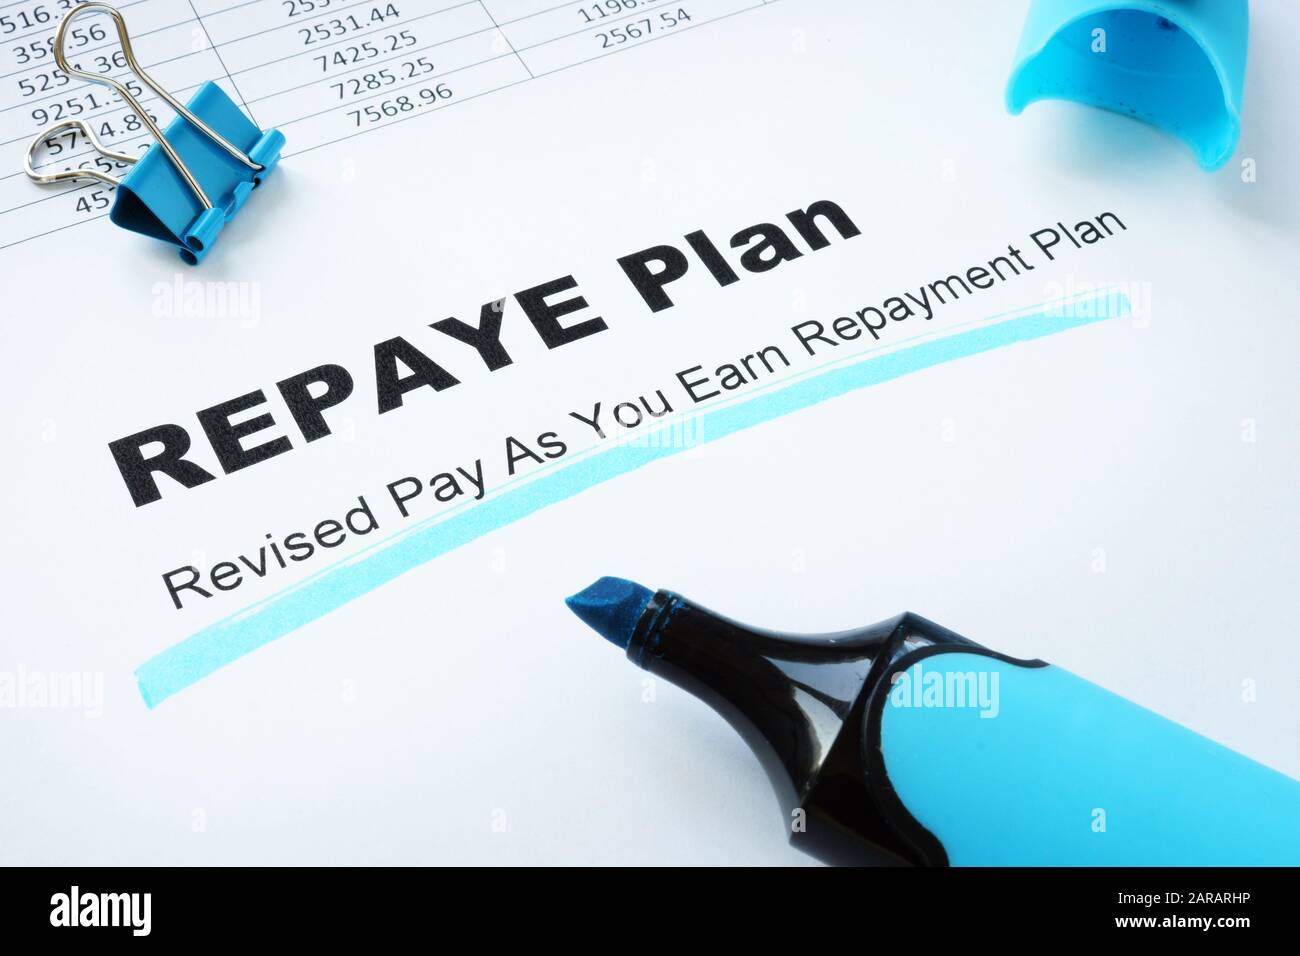 Revised Pay As You Earn Repayment REPAYE Plan. Stock Photo